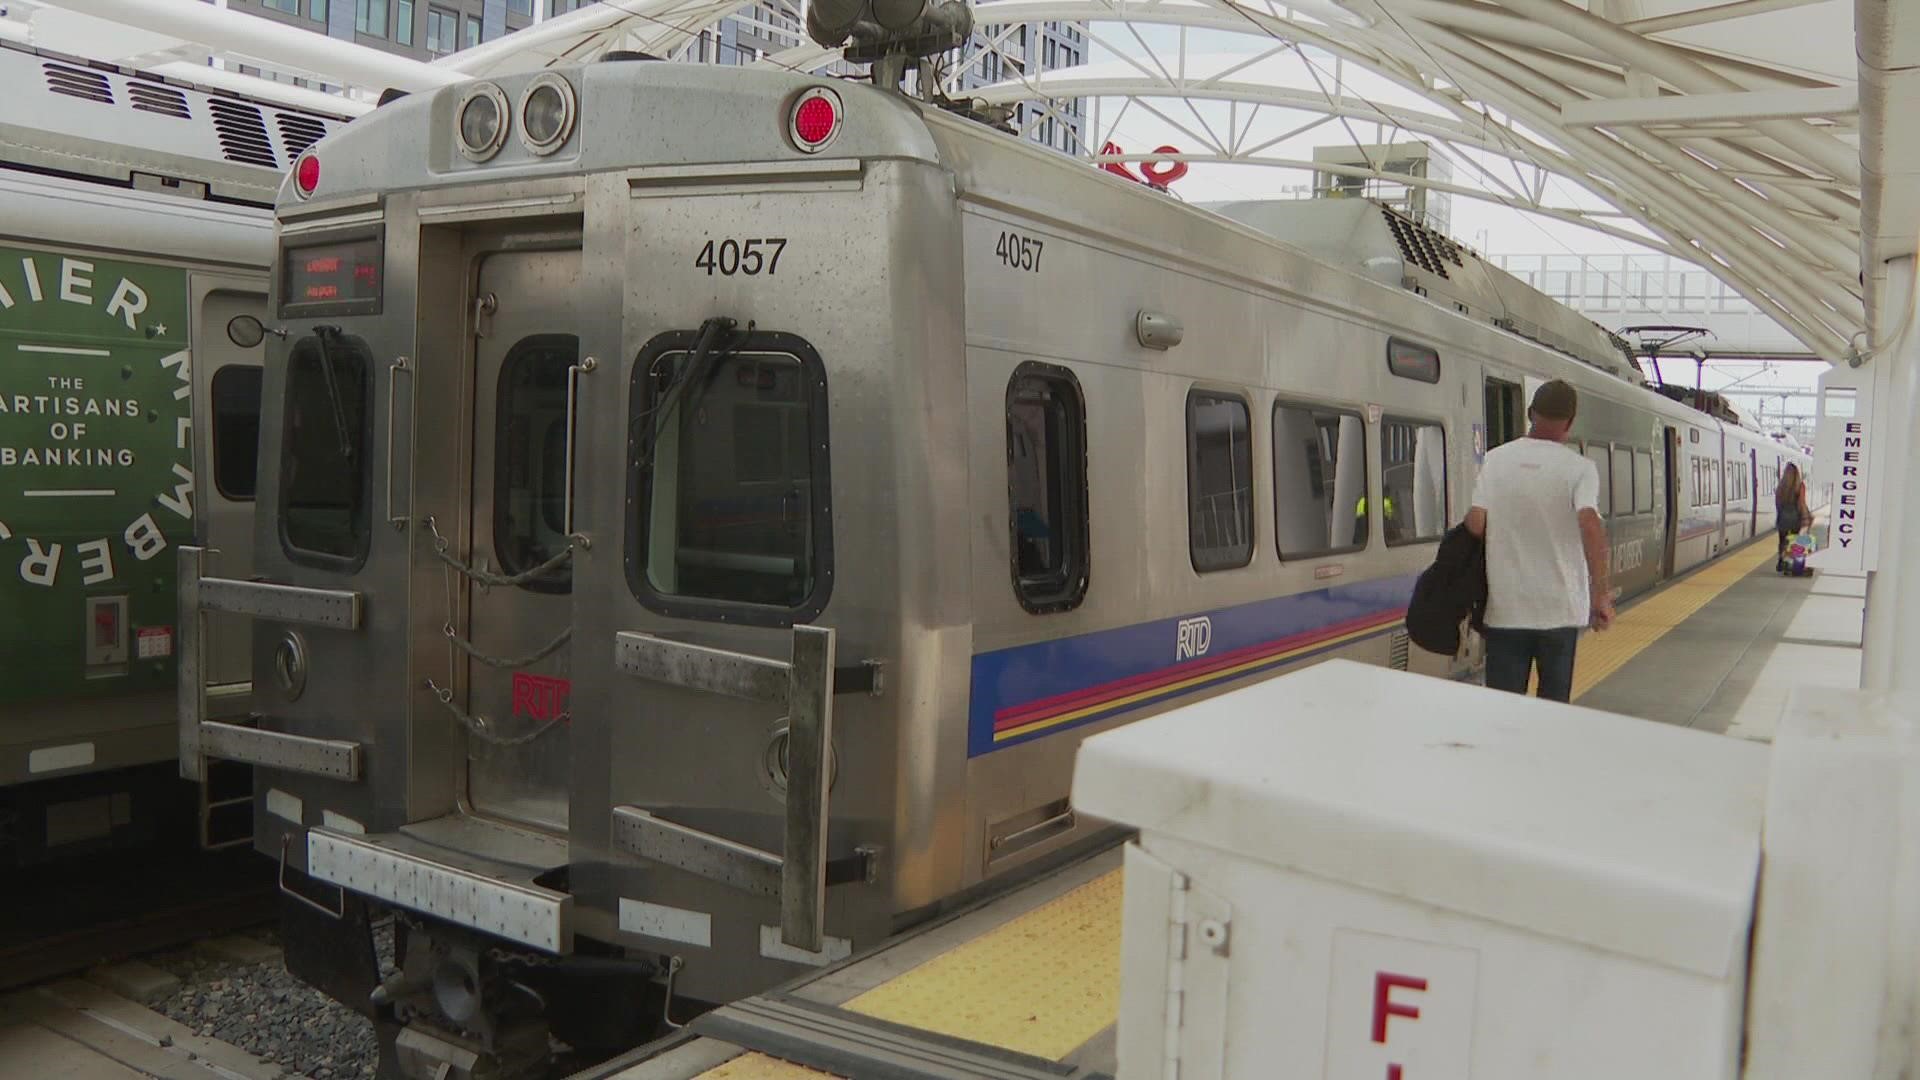 Staffing issues are playing role in trip cancelations for the A Line which runs from Union Station in Denver to Denver International Airport.